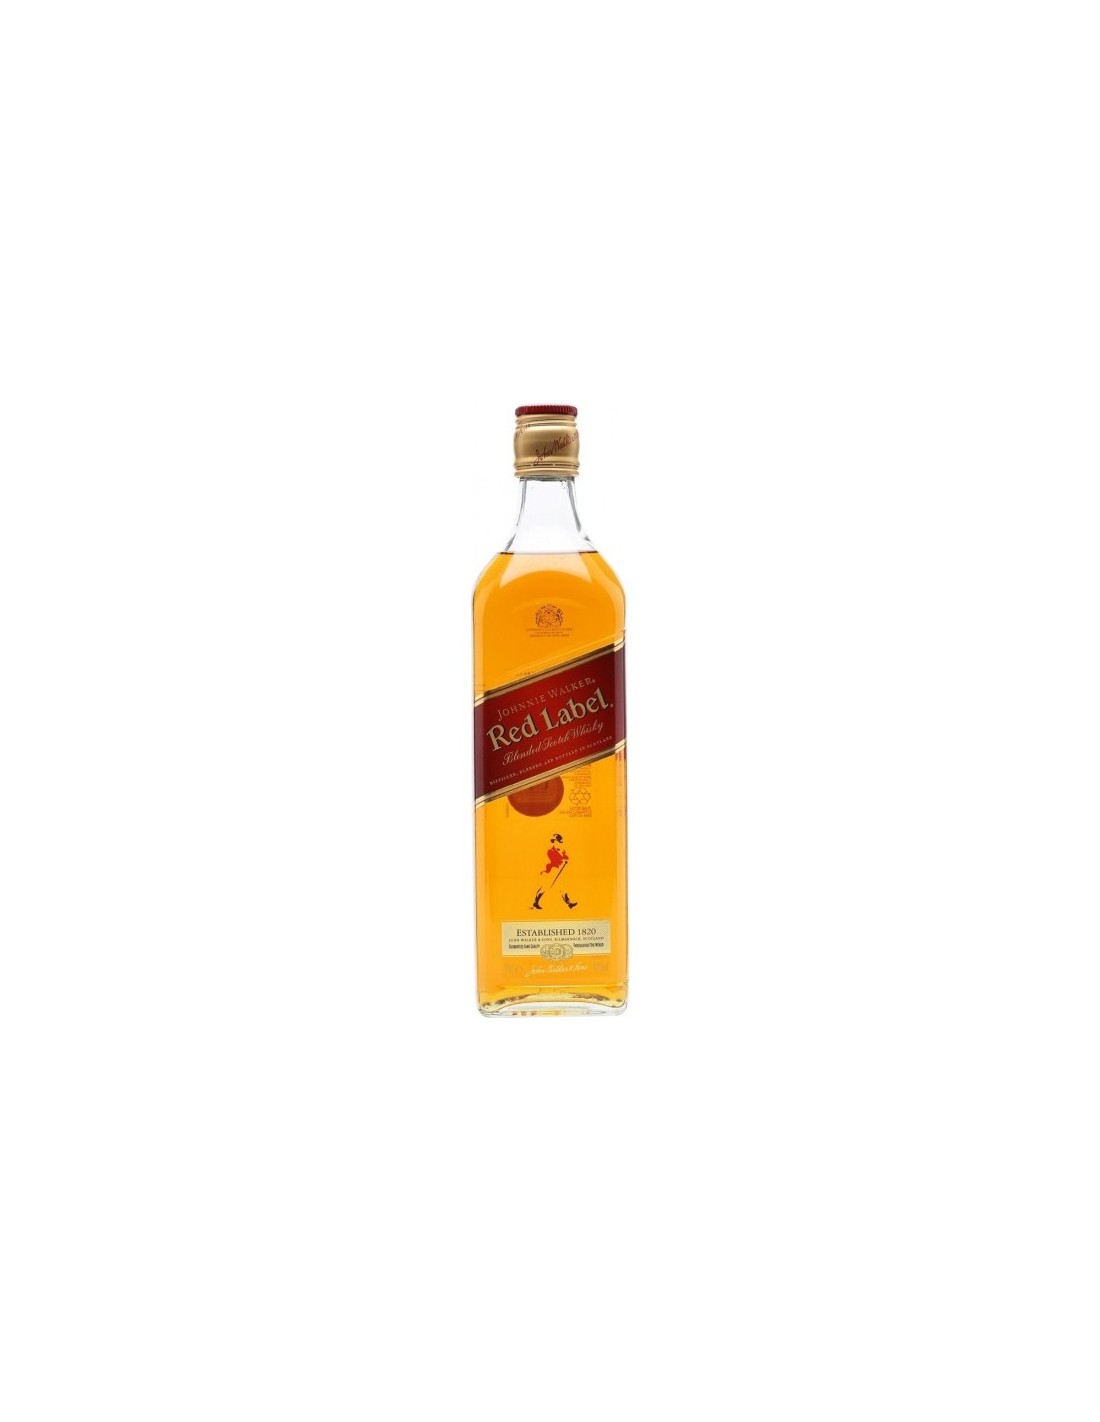 Whisky Johnnie Walker Red Label, 40% alc., 0.5L, Scotia